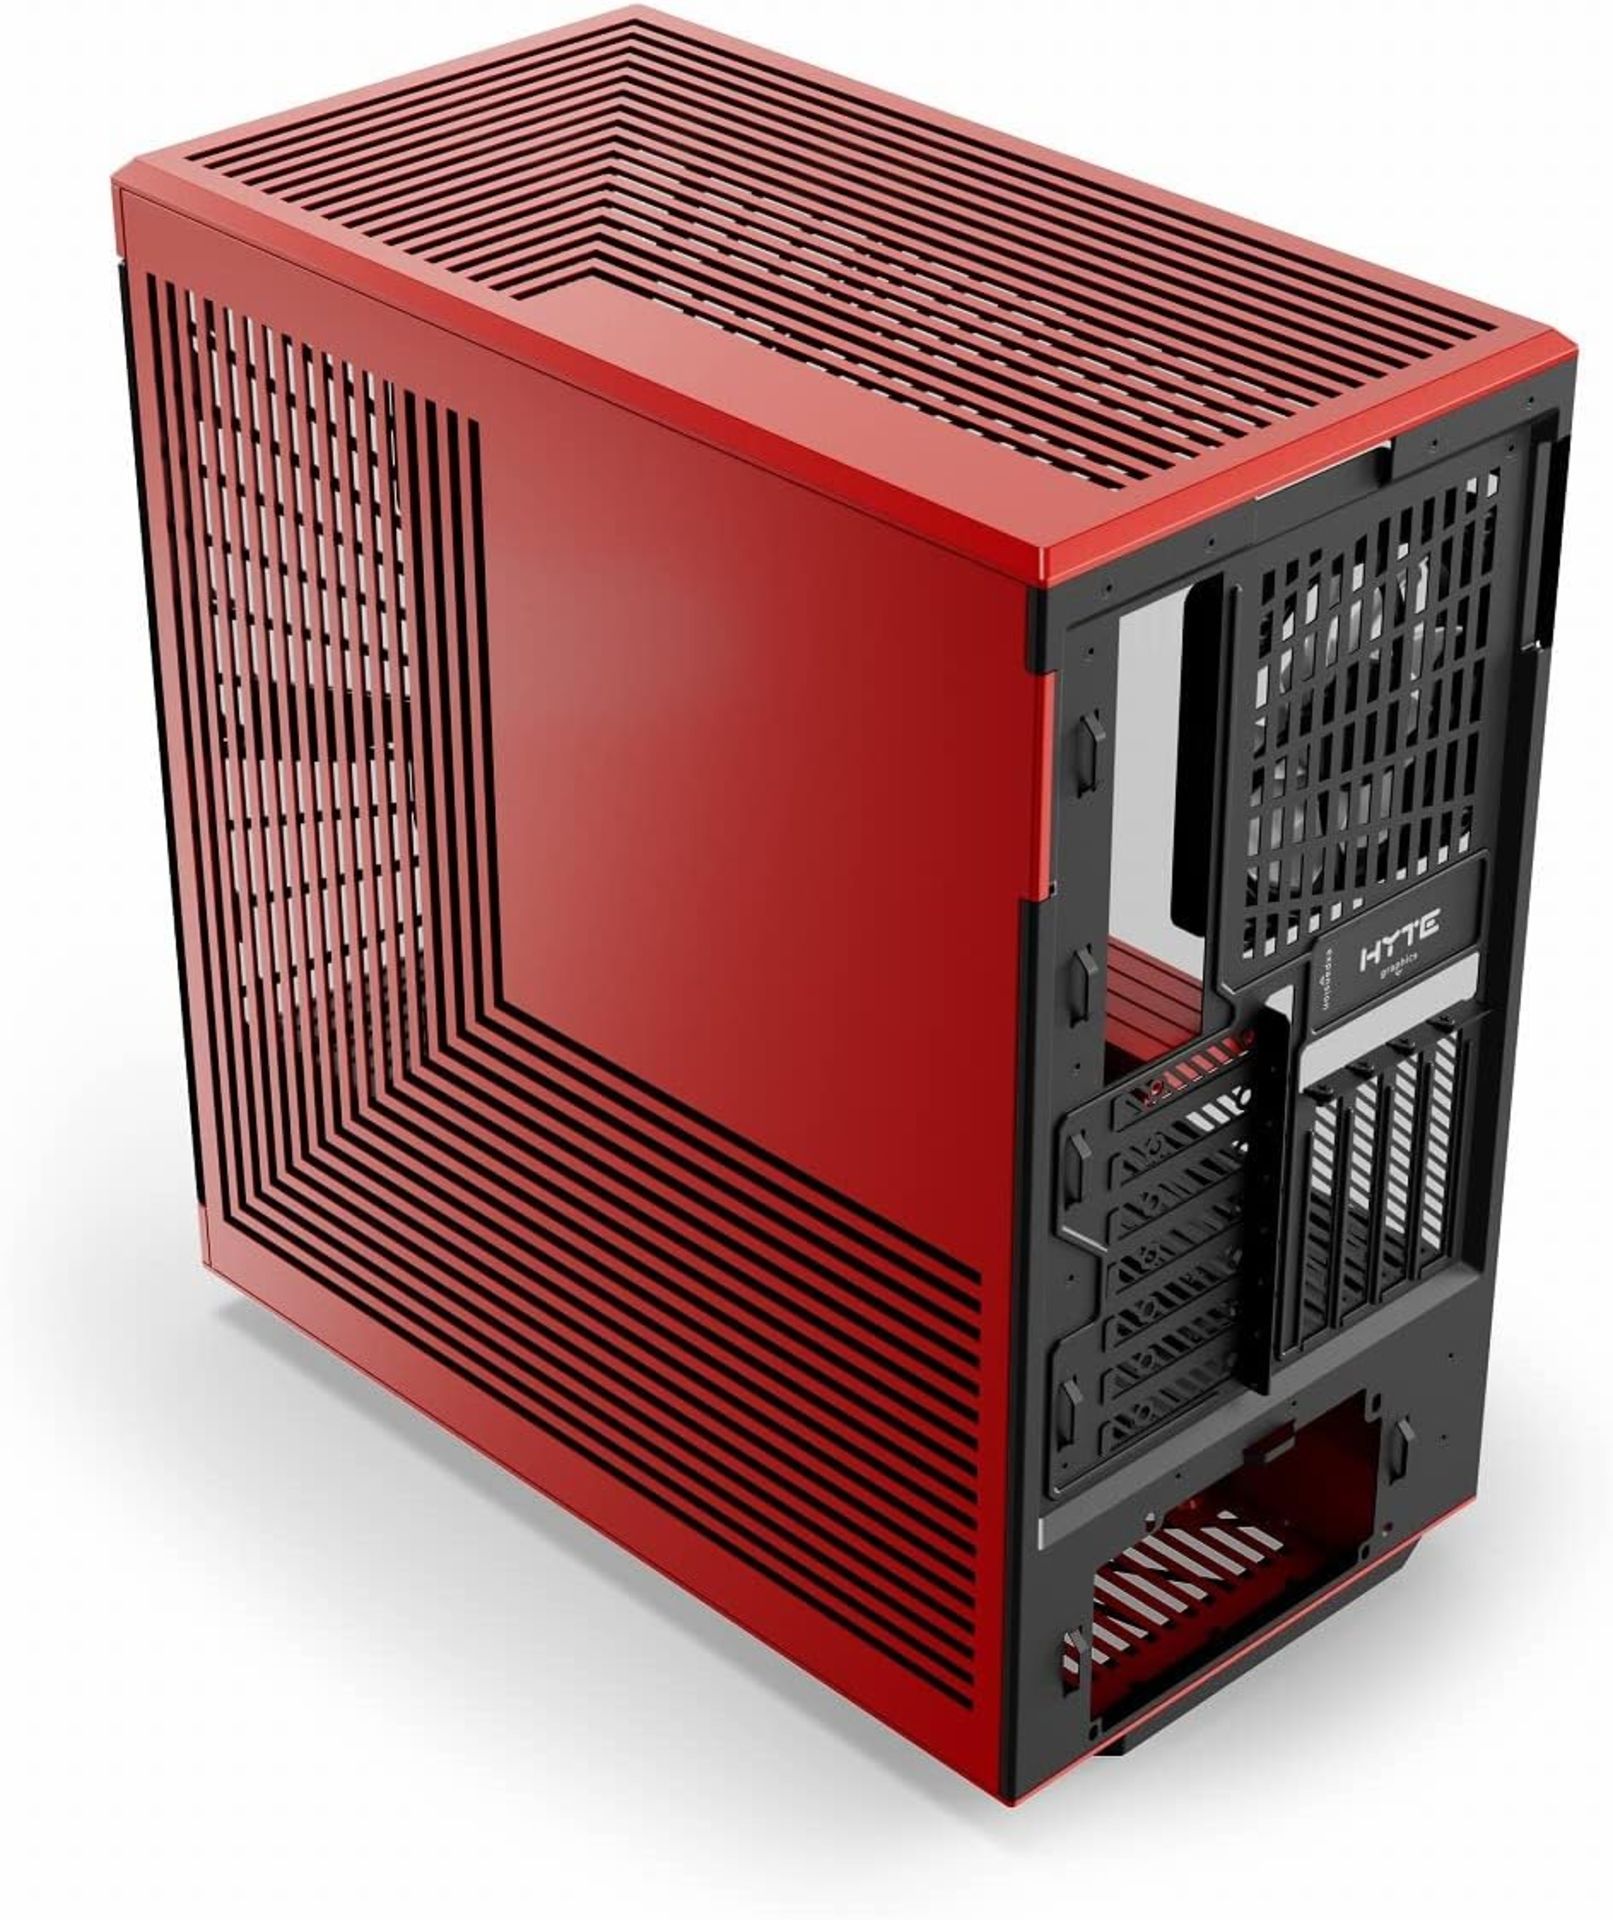 NEW & BOXED HYTE Y40 Mid-Tower ATX Case - Black & Red. RRP £164.99. (R6-7). The HYTE Y40 Mid-Tower - Bild 3 aus 5